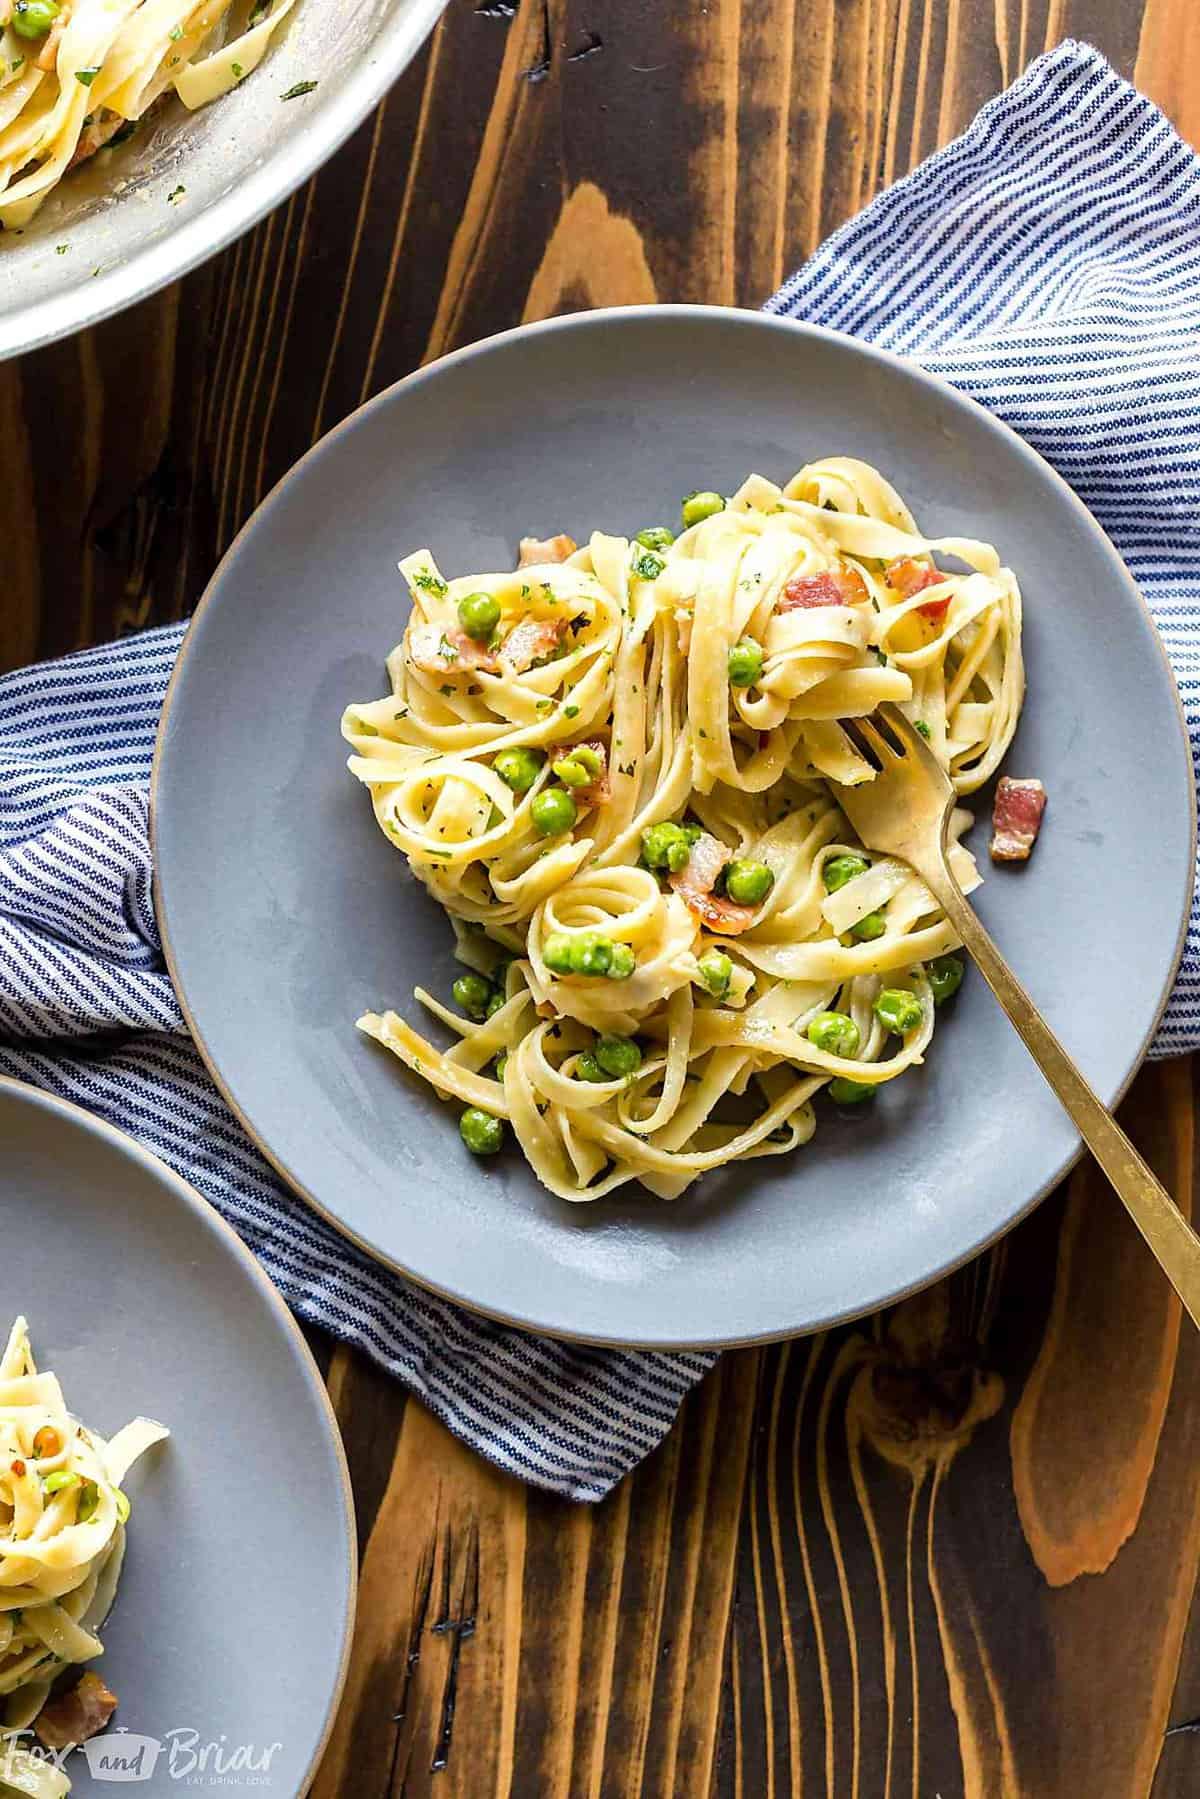 This quick Creamy Pasta with Pancetta and Peas only takes 15 minutes and is an easy and elegant dinner for any night of the week! @QFCgrocery #QFCdelivery #sponsored Pasta with peas and bacon | Pasta with peas and pancetta recipe | noodles with peas and bacon | cramy pasta recipe | Easy pasta recipe | easy dinner recipe | 15 minute dinner | quick pasta recipe | date night recipe | peas and bacon cream sauce